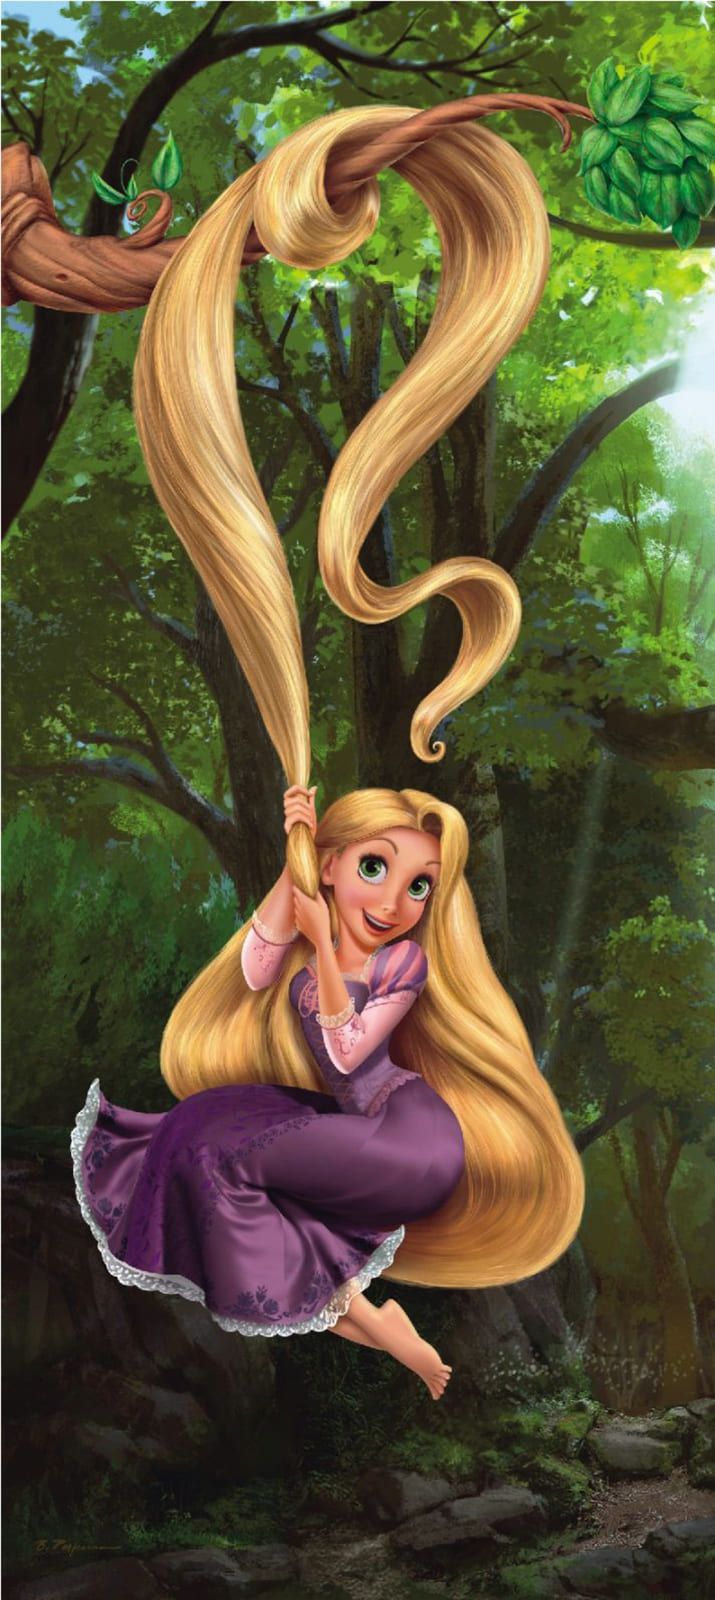 Rapunzel, with her signature long hair, swinging on a tree branch in the forest. - Rapunzel